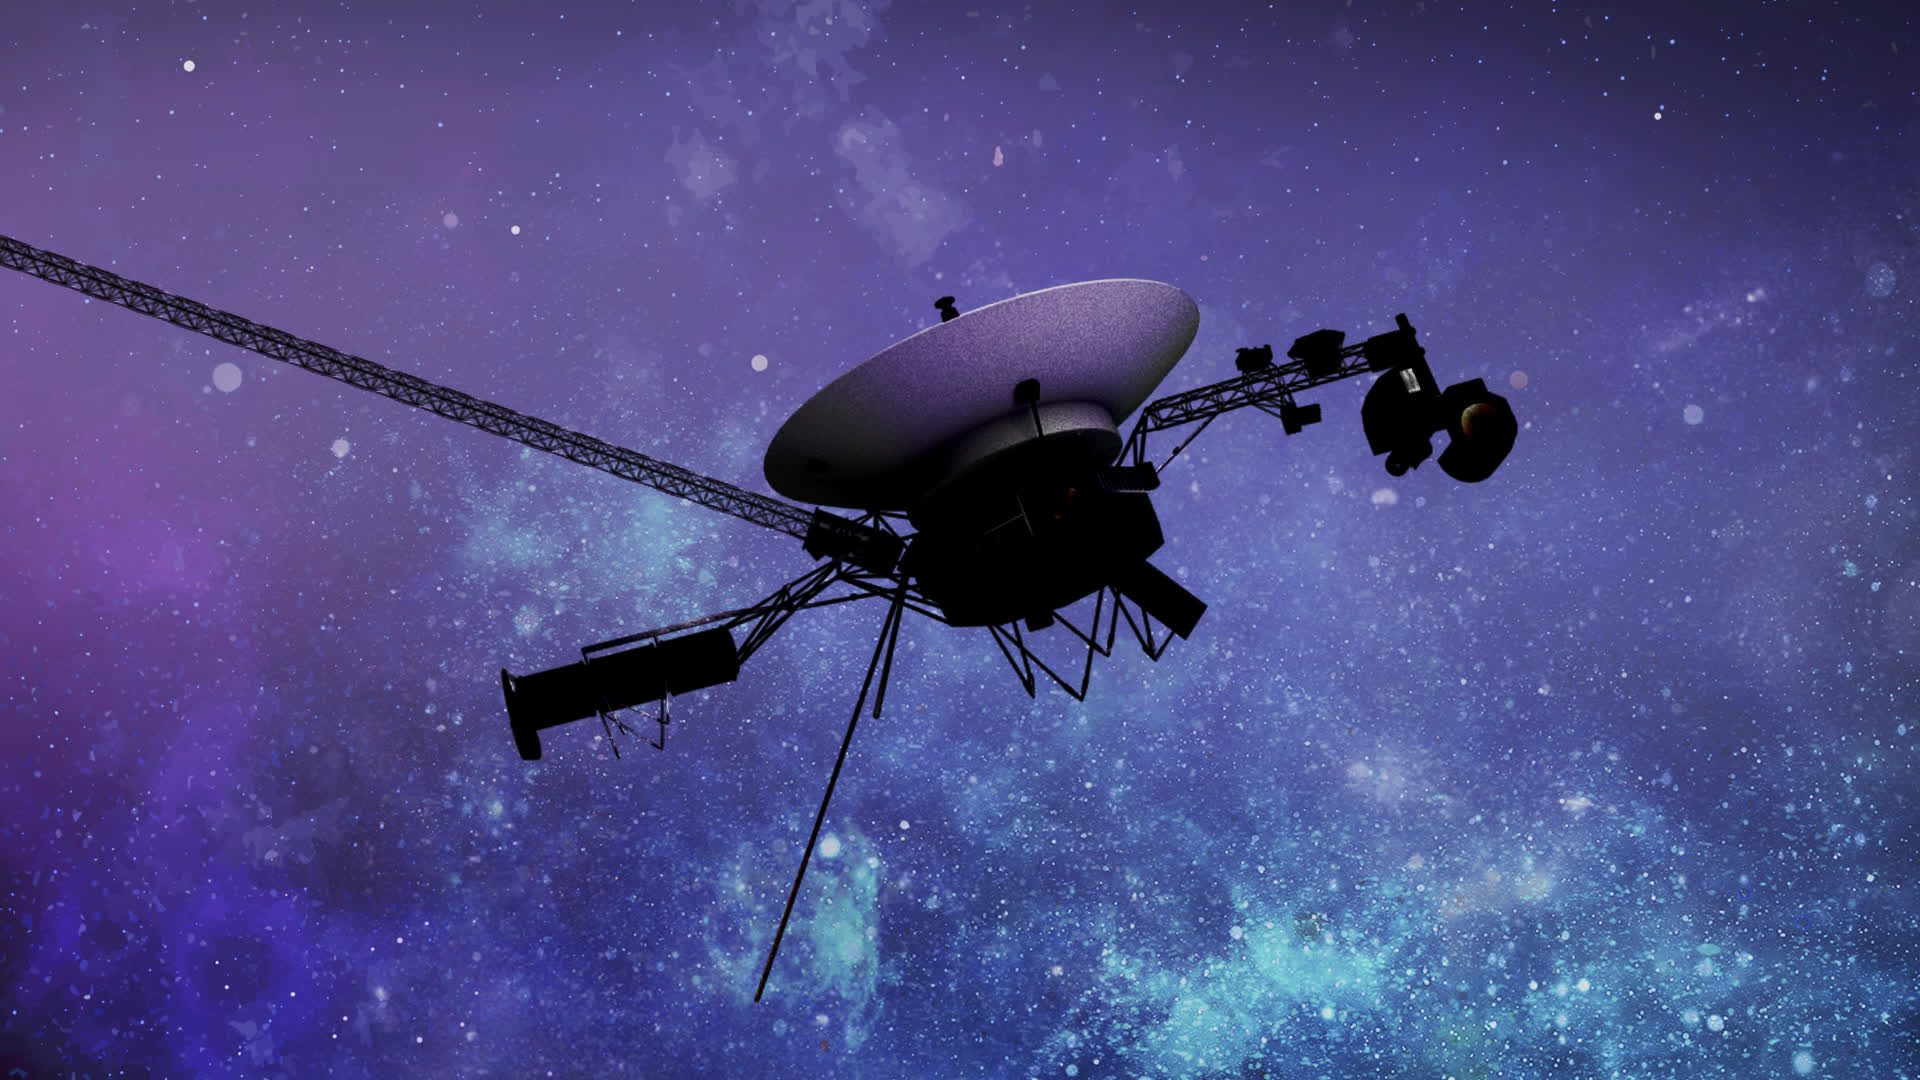 NASA will need a miracle to fix glitched Voyager 1 probe